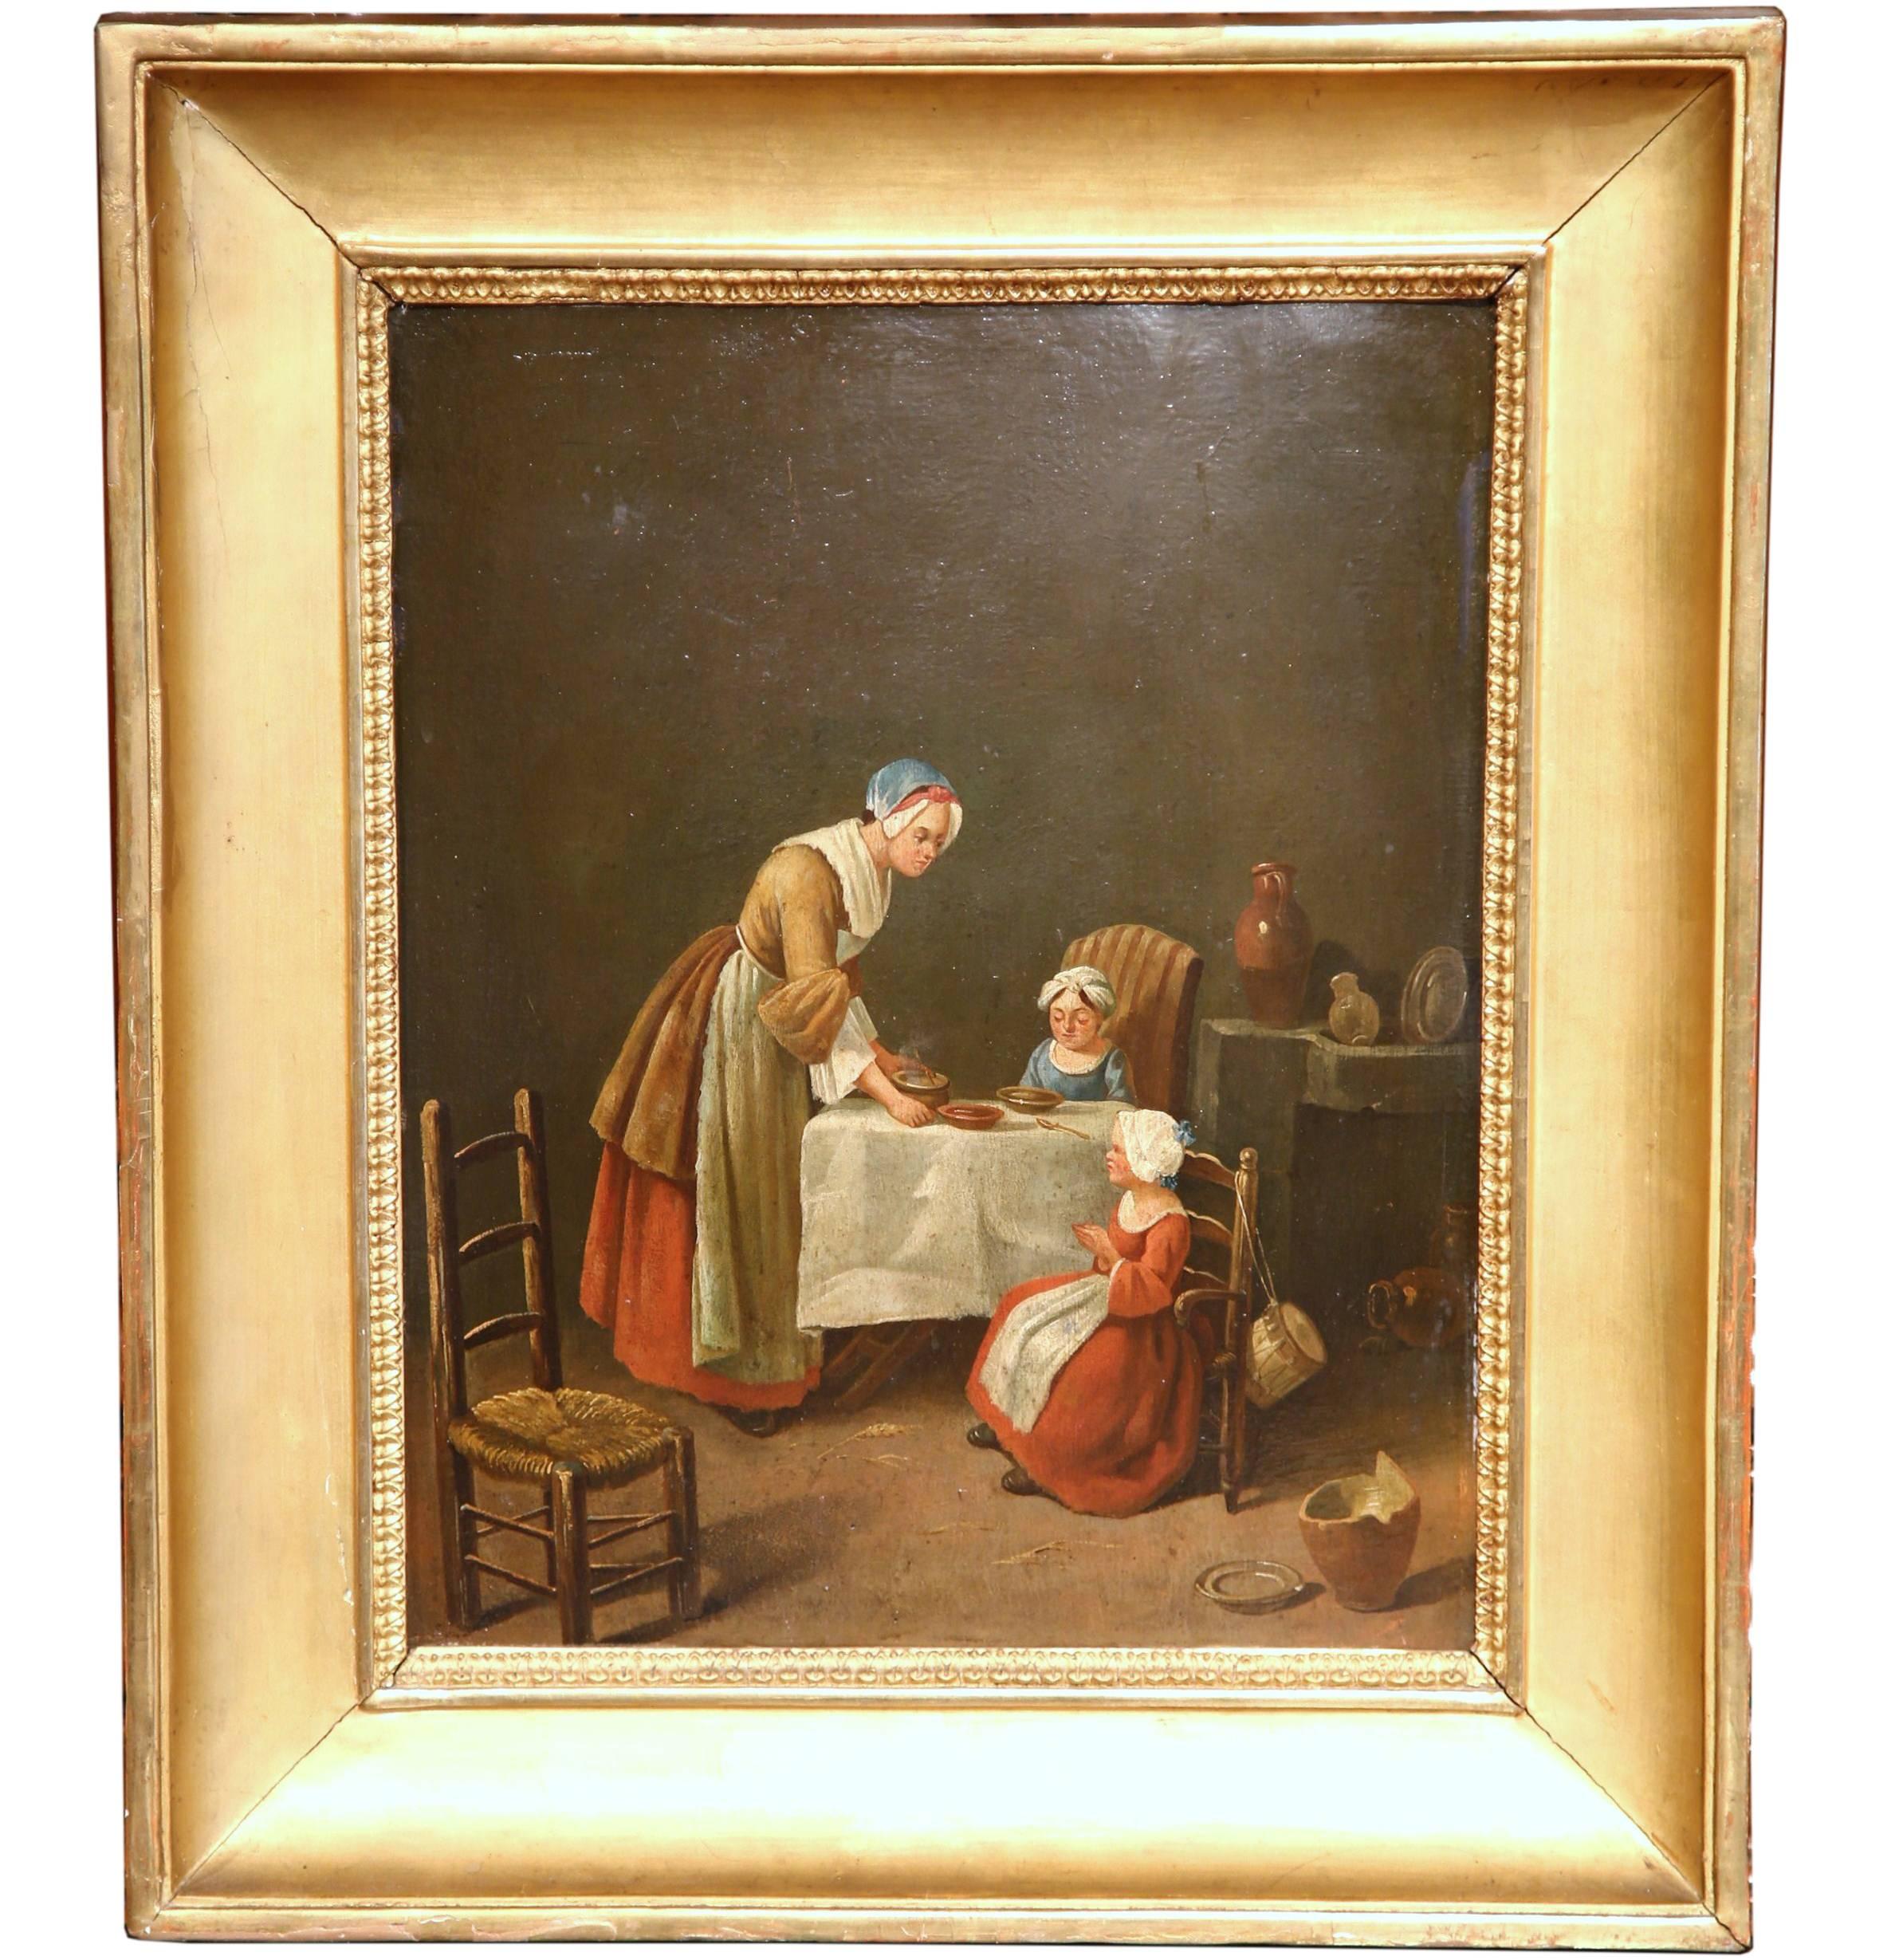 Unknown Interior Painting - 19th Century French Oil Painting on Board "Saying Grace" in Giltwood Frame